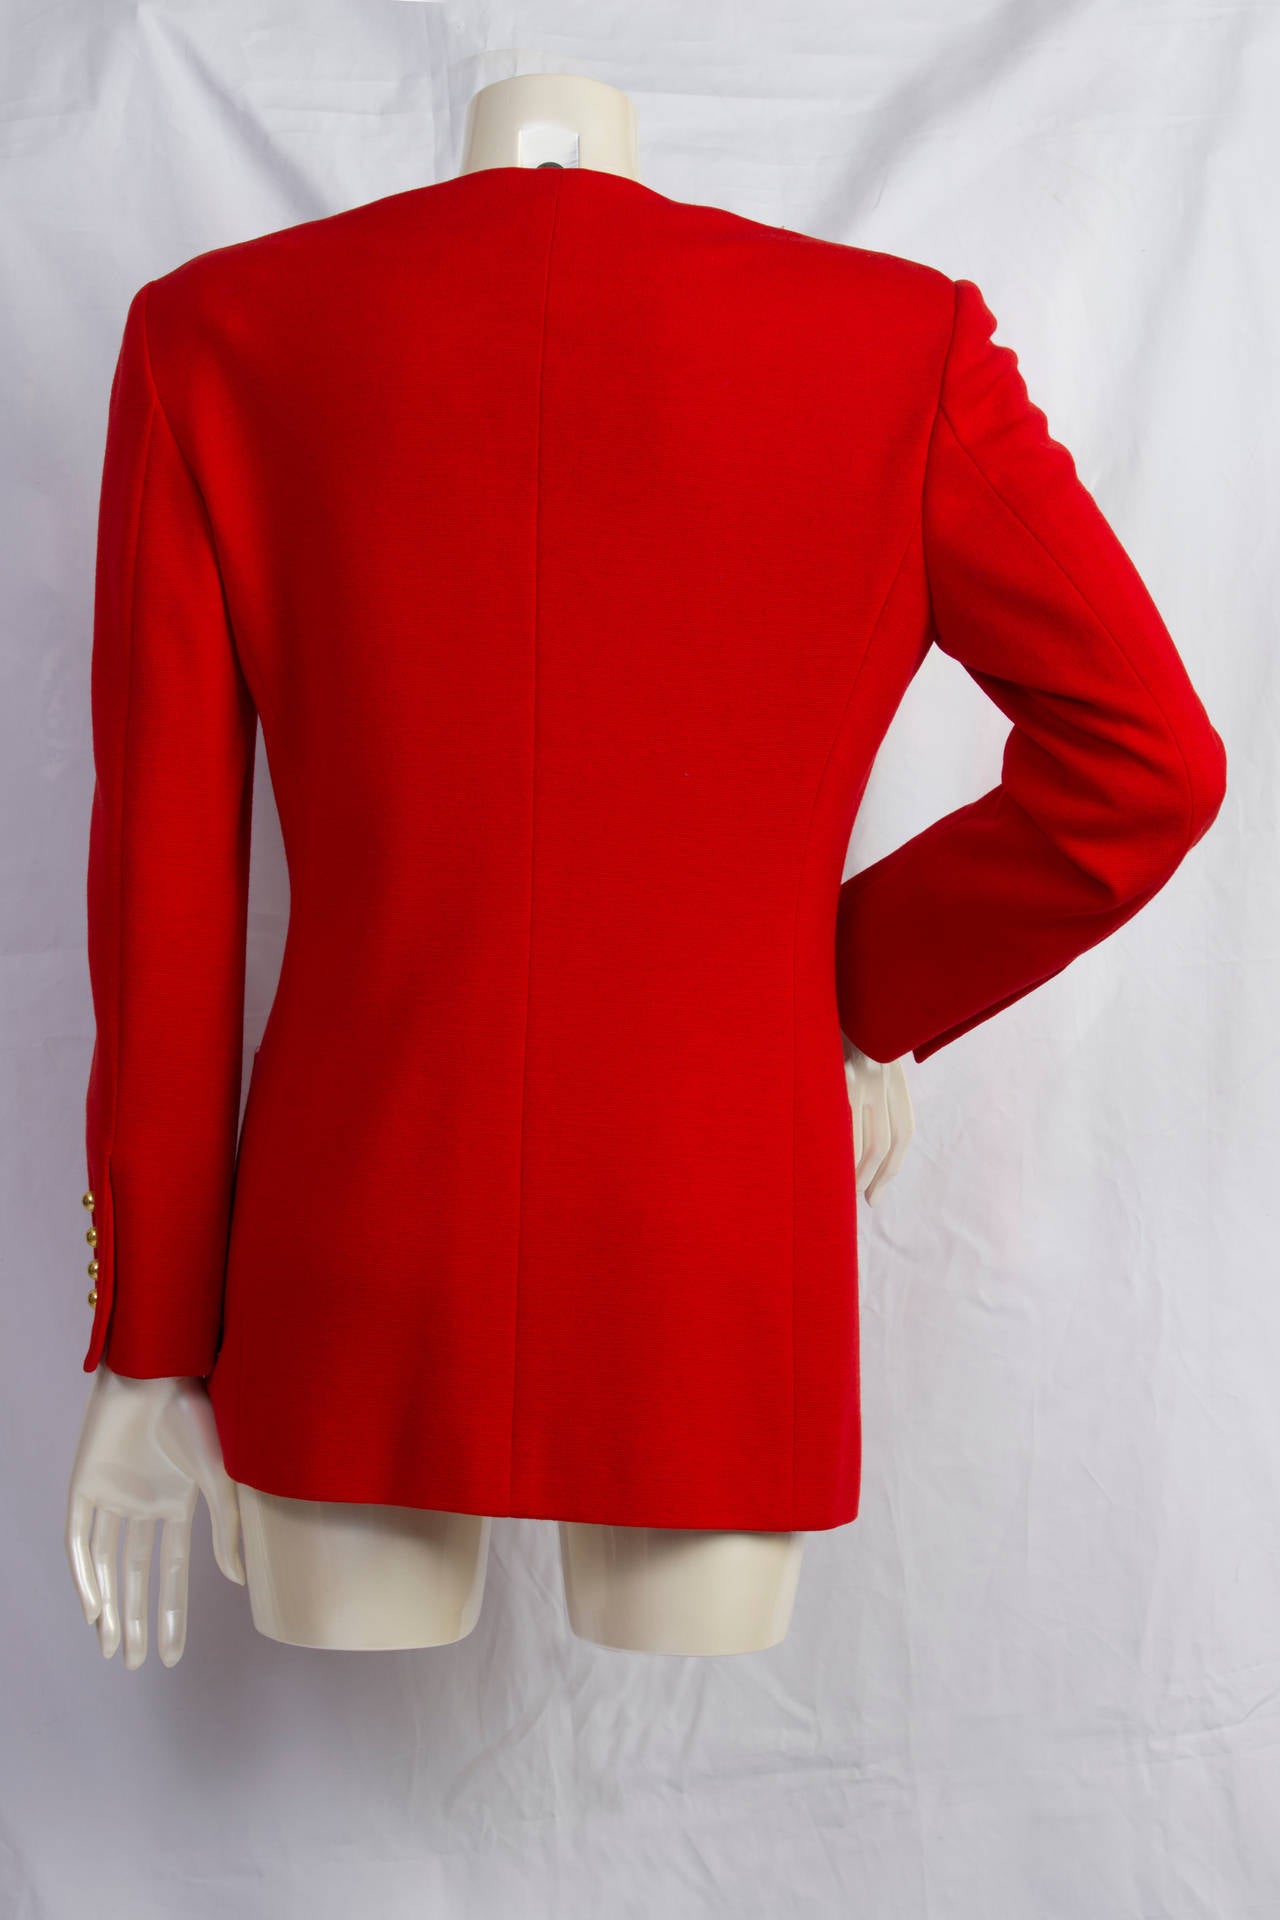 1980s Moschino Couture red jacket with gold bottons.